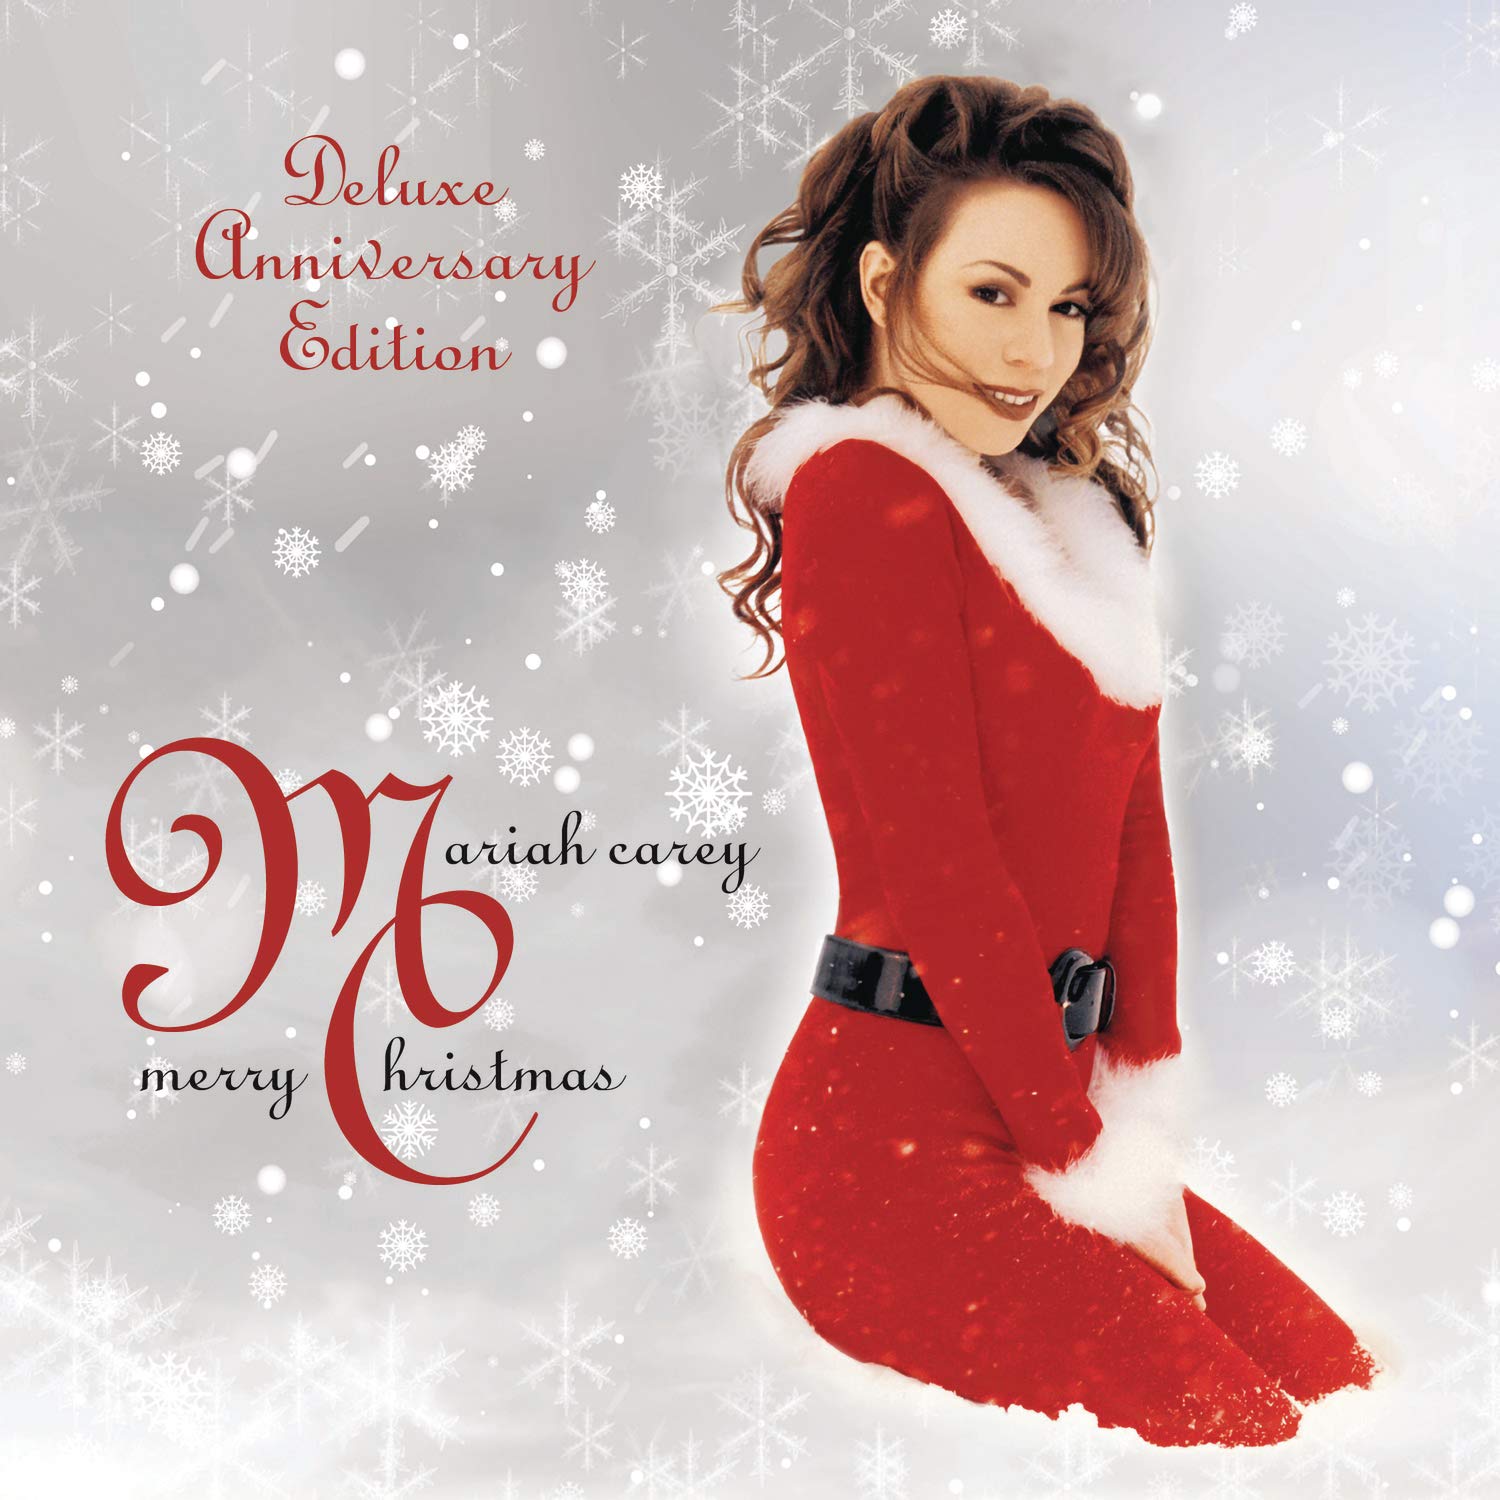 TVD Radar: Mariah Carey, "All I Want For Christmas Is You" vinyl in stores 12/20 - The Vinyl ...